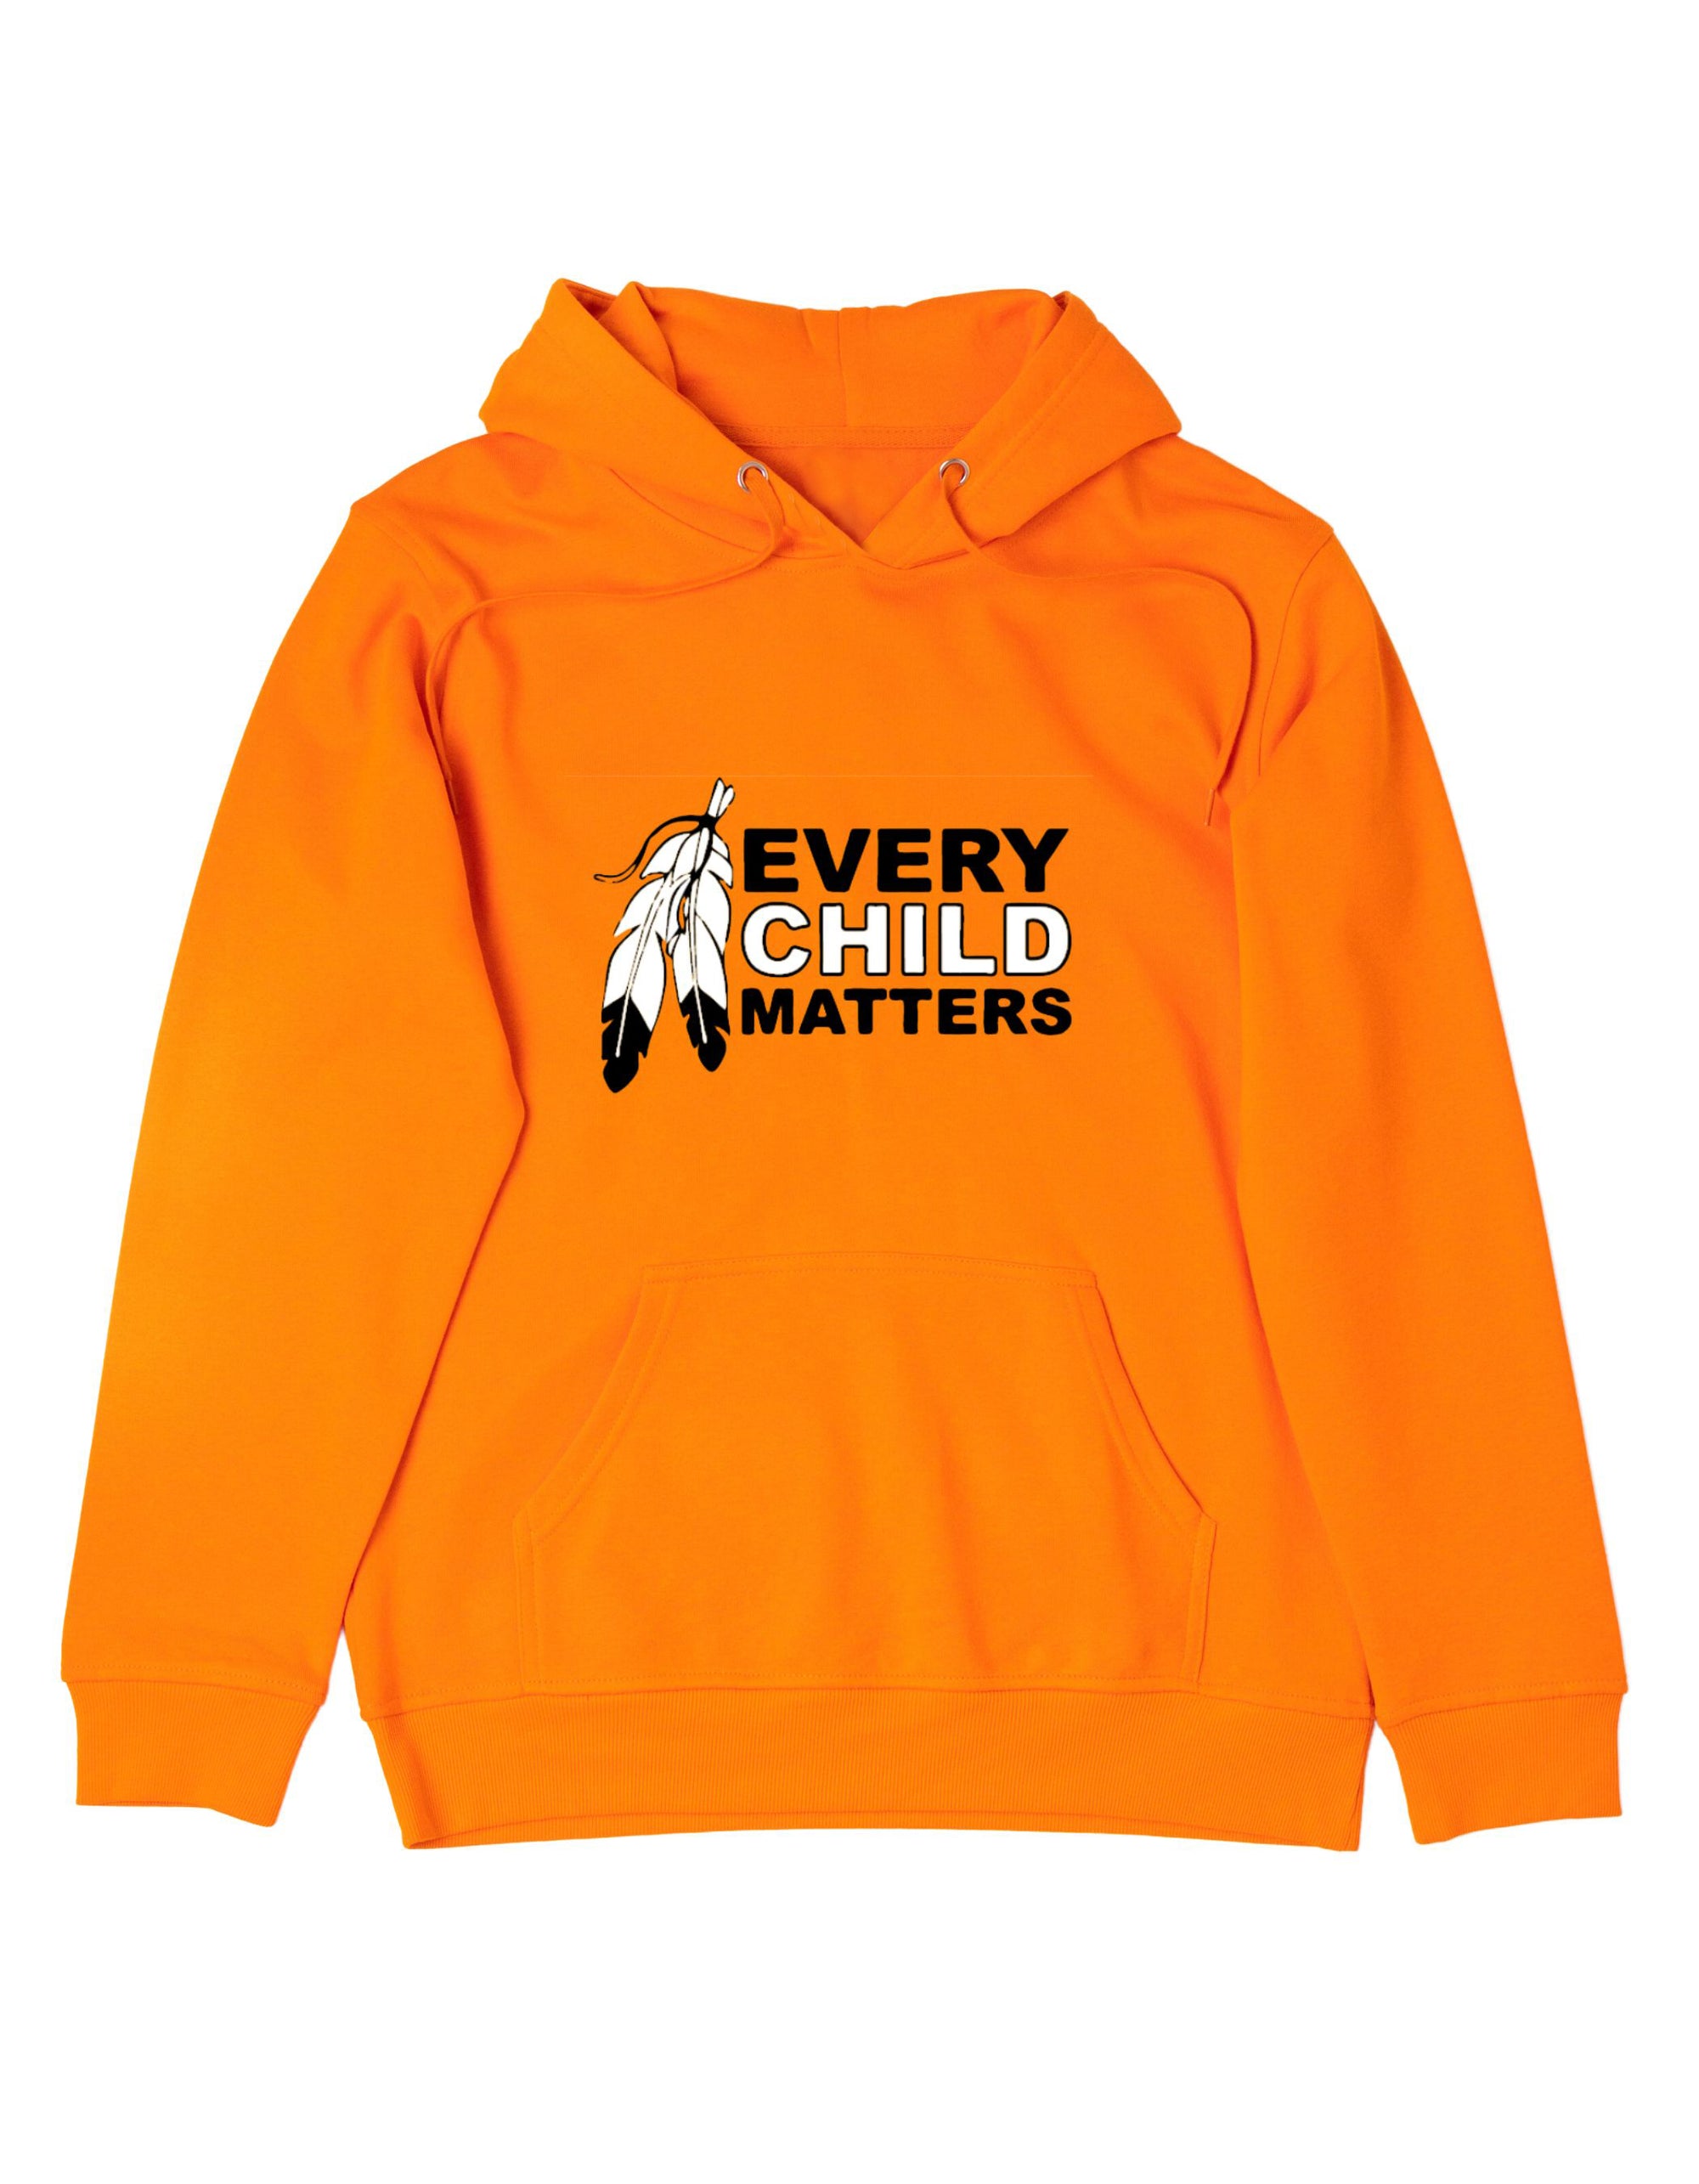 Hoodie or Crew Neck ADULT Orange Shirt Day - fundraiser for Dufferin County Cultural Resource Circle